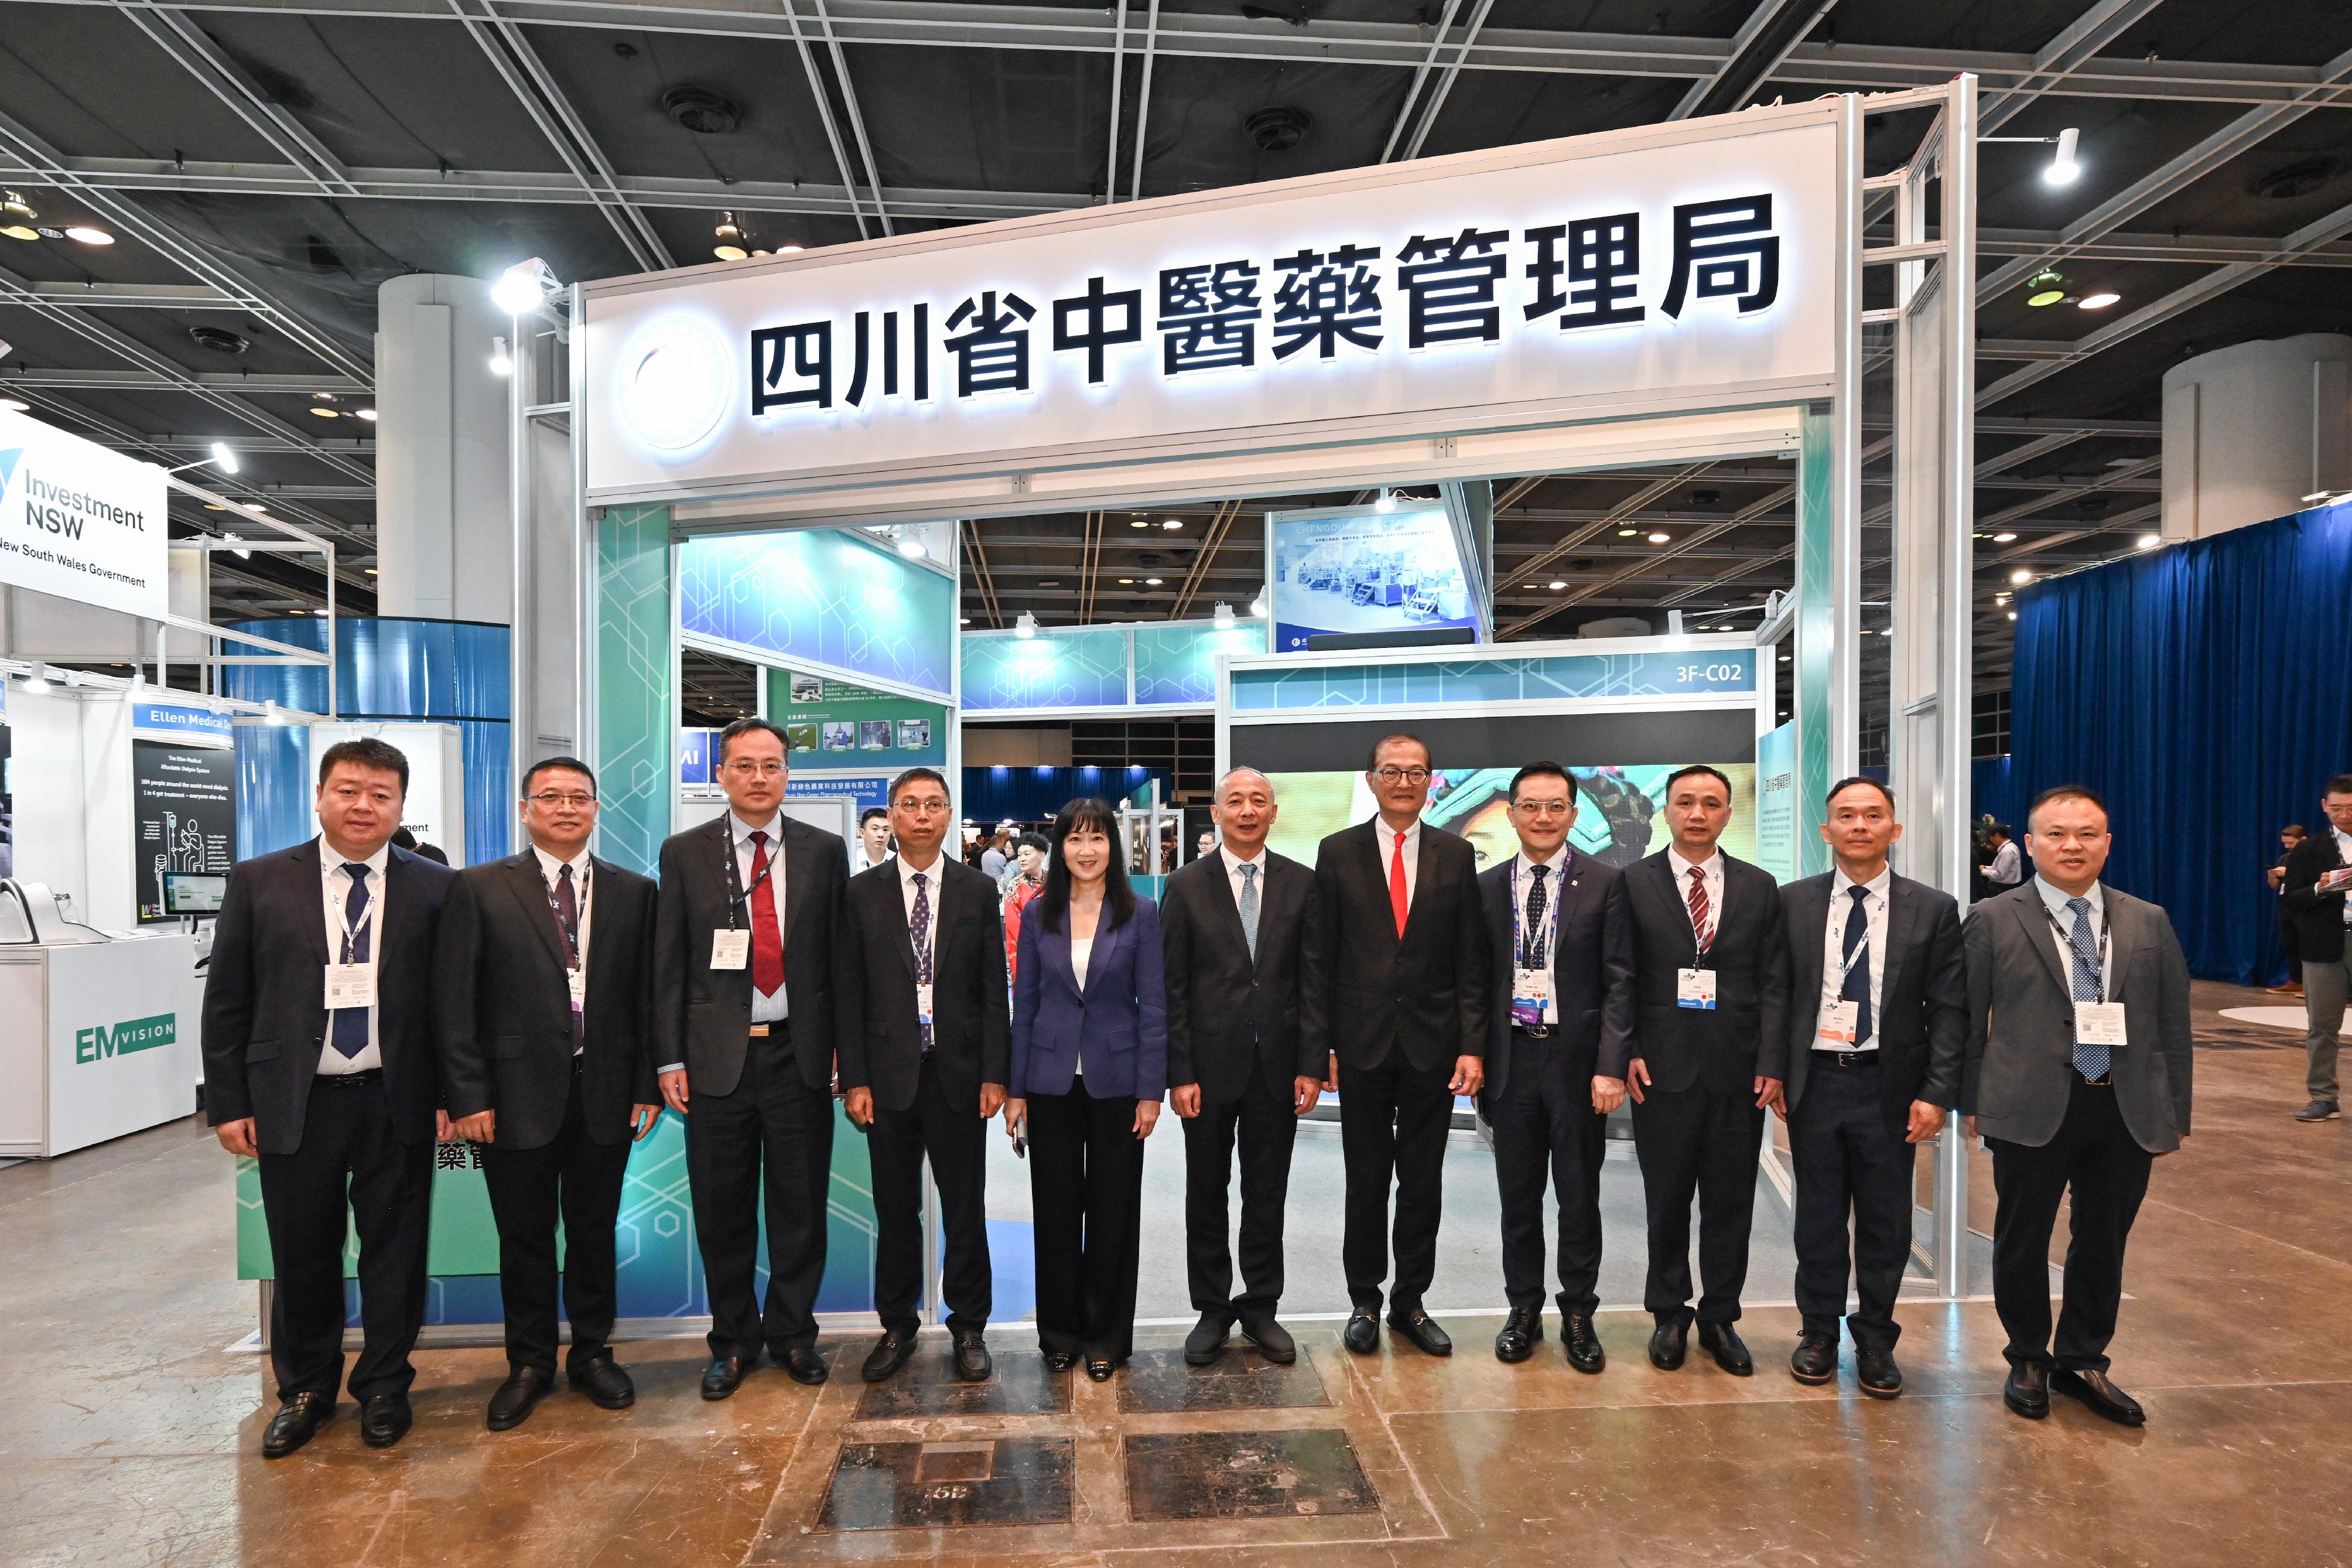 The Secretary for Health, Professor Lo Chung-mau, visited the booth set up by the Sichuan Provincial Administration of Traditional Chinese Medicine at the Asia Summit on Global Health today (May 16). Photo shows Professor Lo (fifth right); the Director of the Sichuan Provincial Administration of Traditional Chinese Medicine, Mr Tian Xingjun (sixth right); the Director of Health, Dr Ronald Lam (fourth right), and other guests.